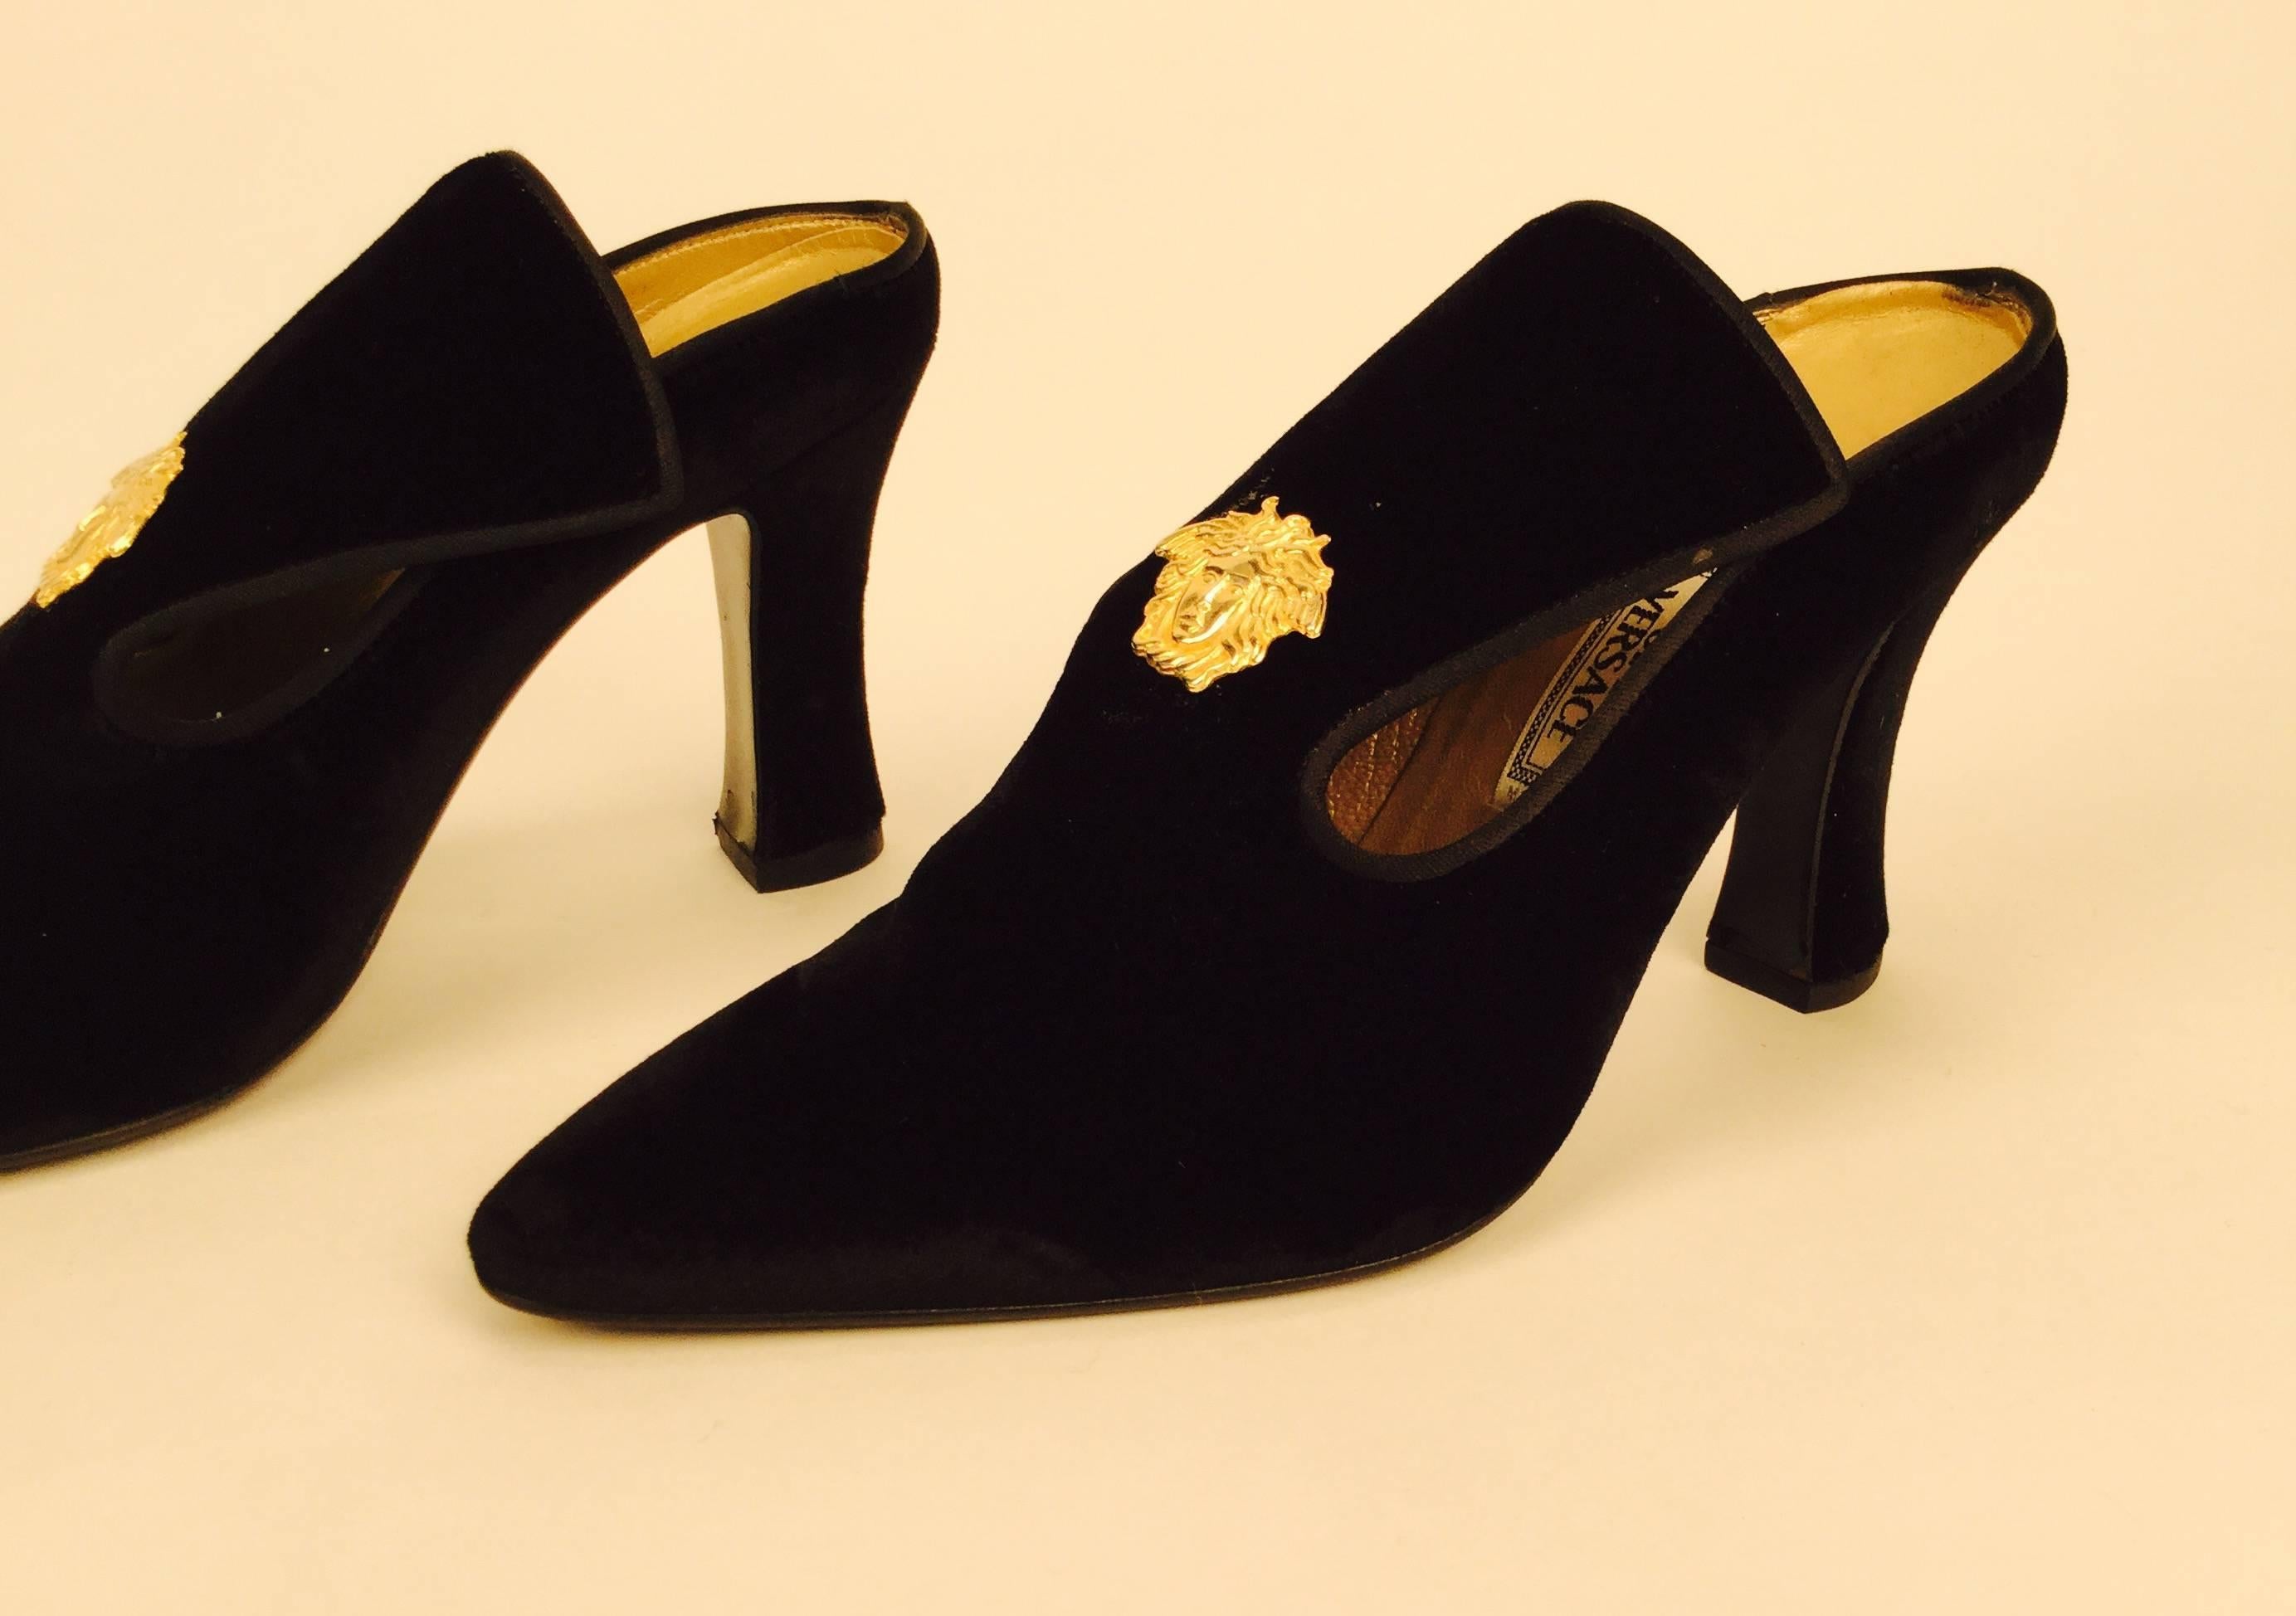 Highly coveted this early Gianni Versace high cut velvet mules from the 1980s with a curved heel is exceptionally designed and wonderfully constructed.

Inspired by the Eighteenth century, these shoes have an antique silhouette with a slightly